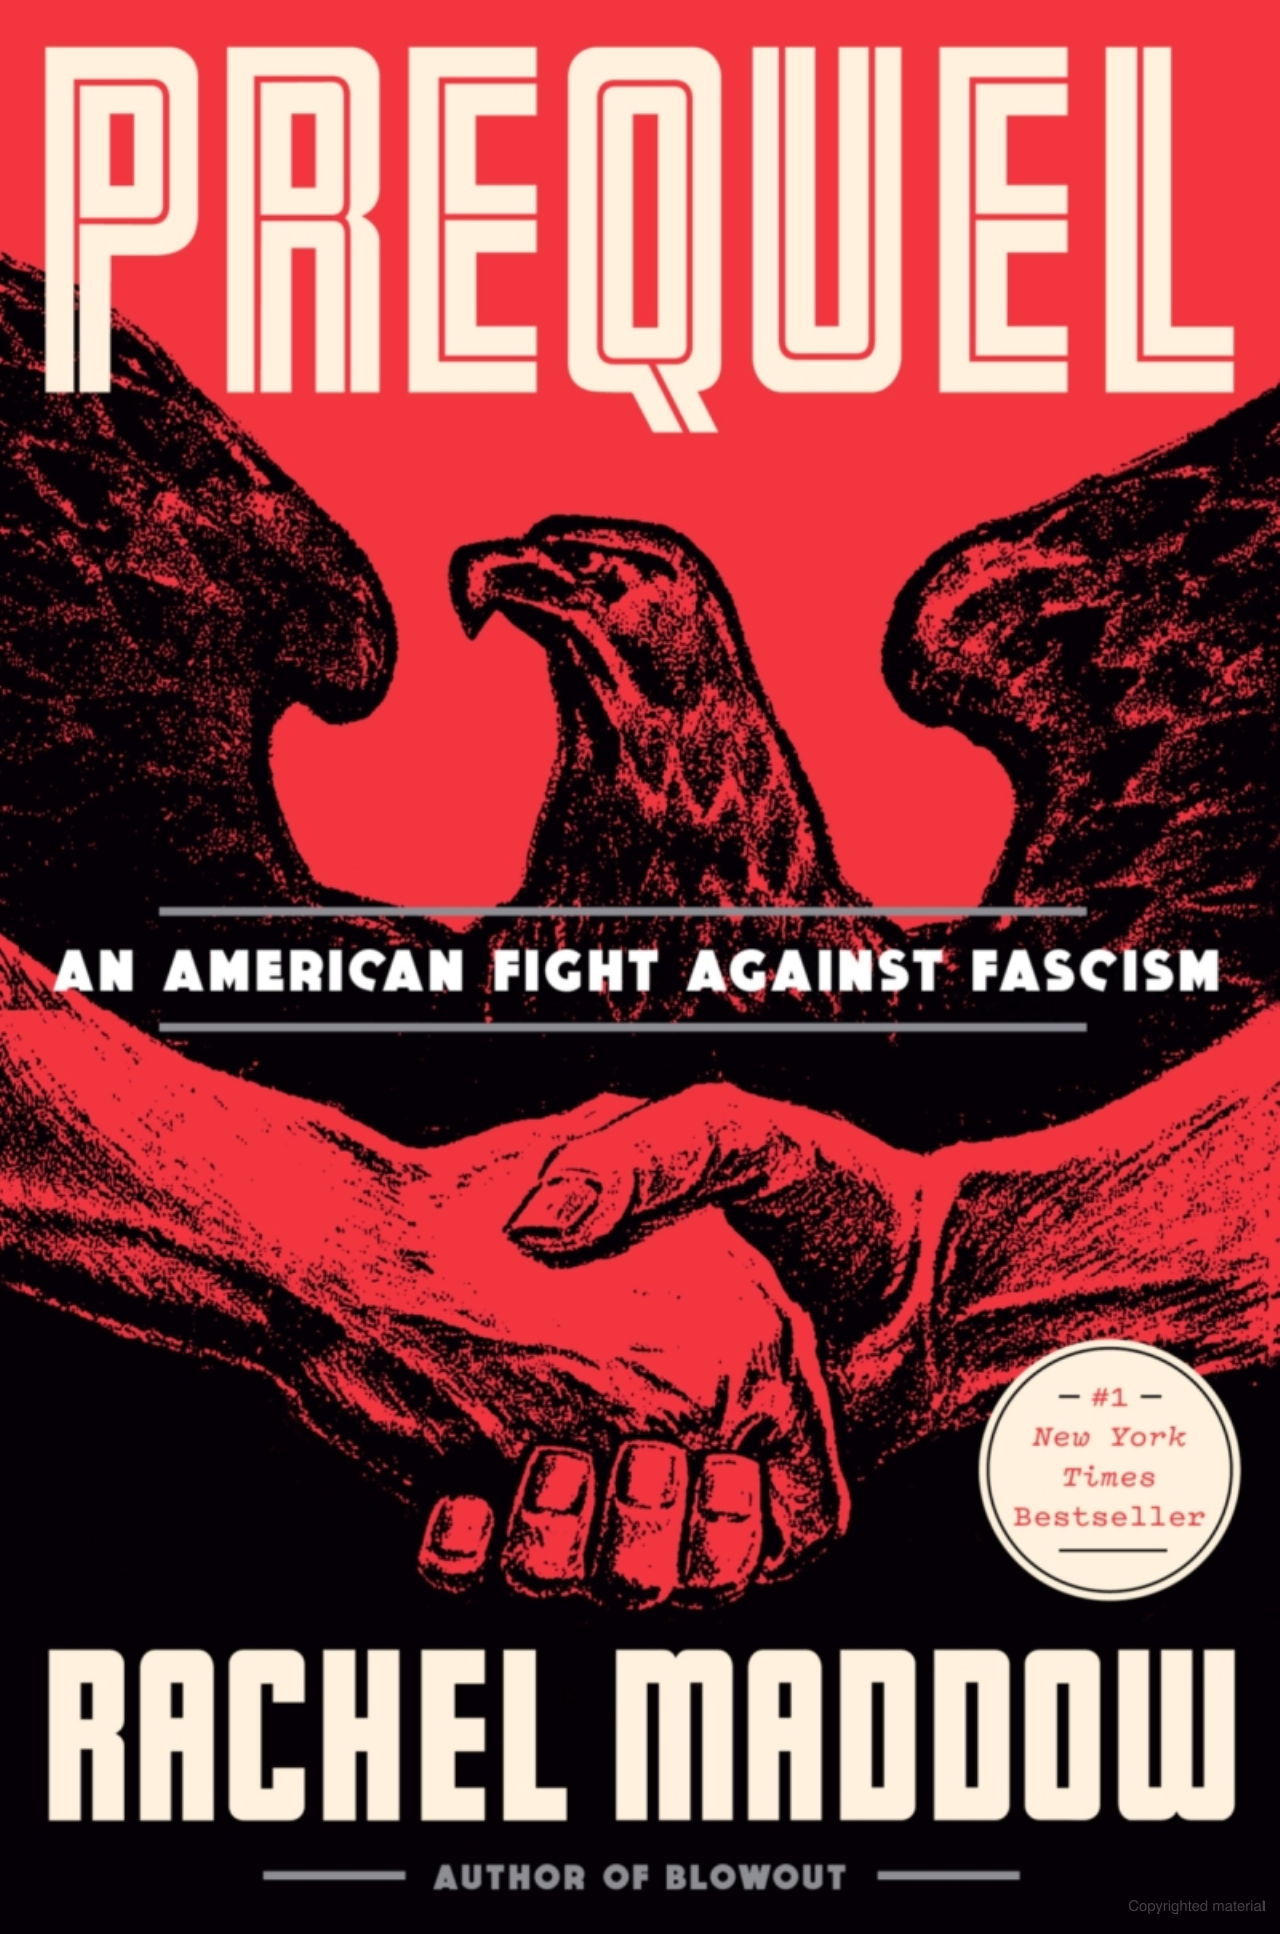 Image of the book cover featuring a drawing or an eagle and 2 hands shaking in agreement.